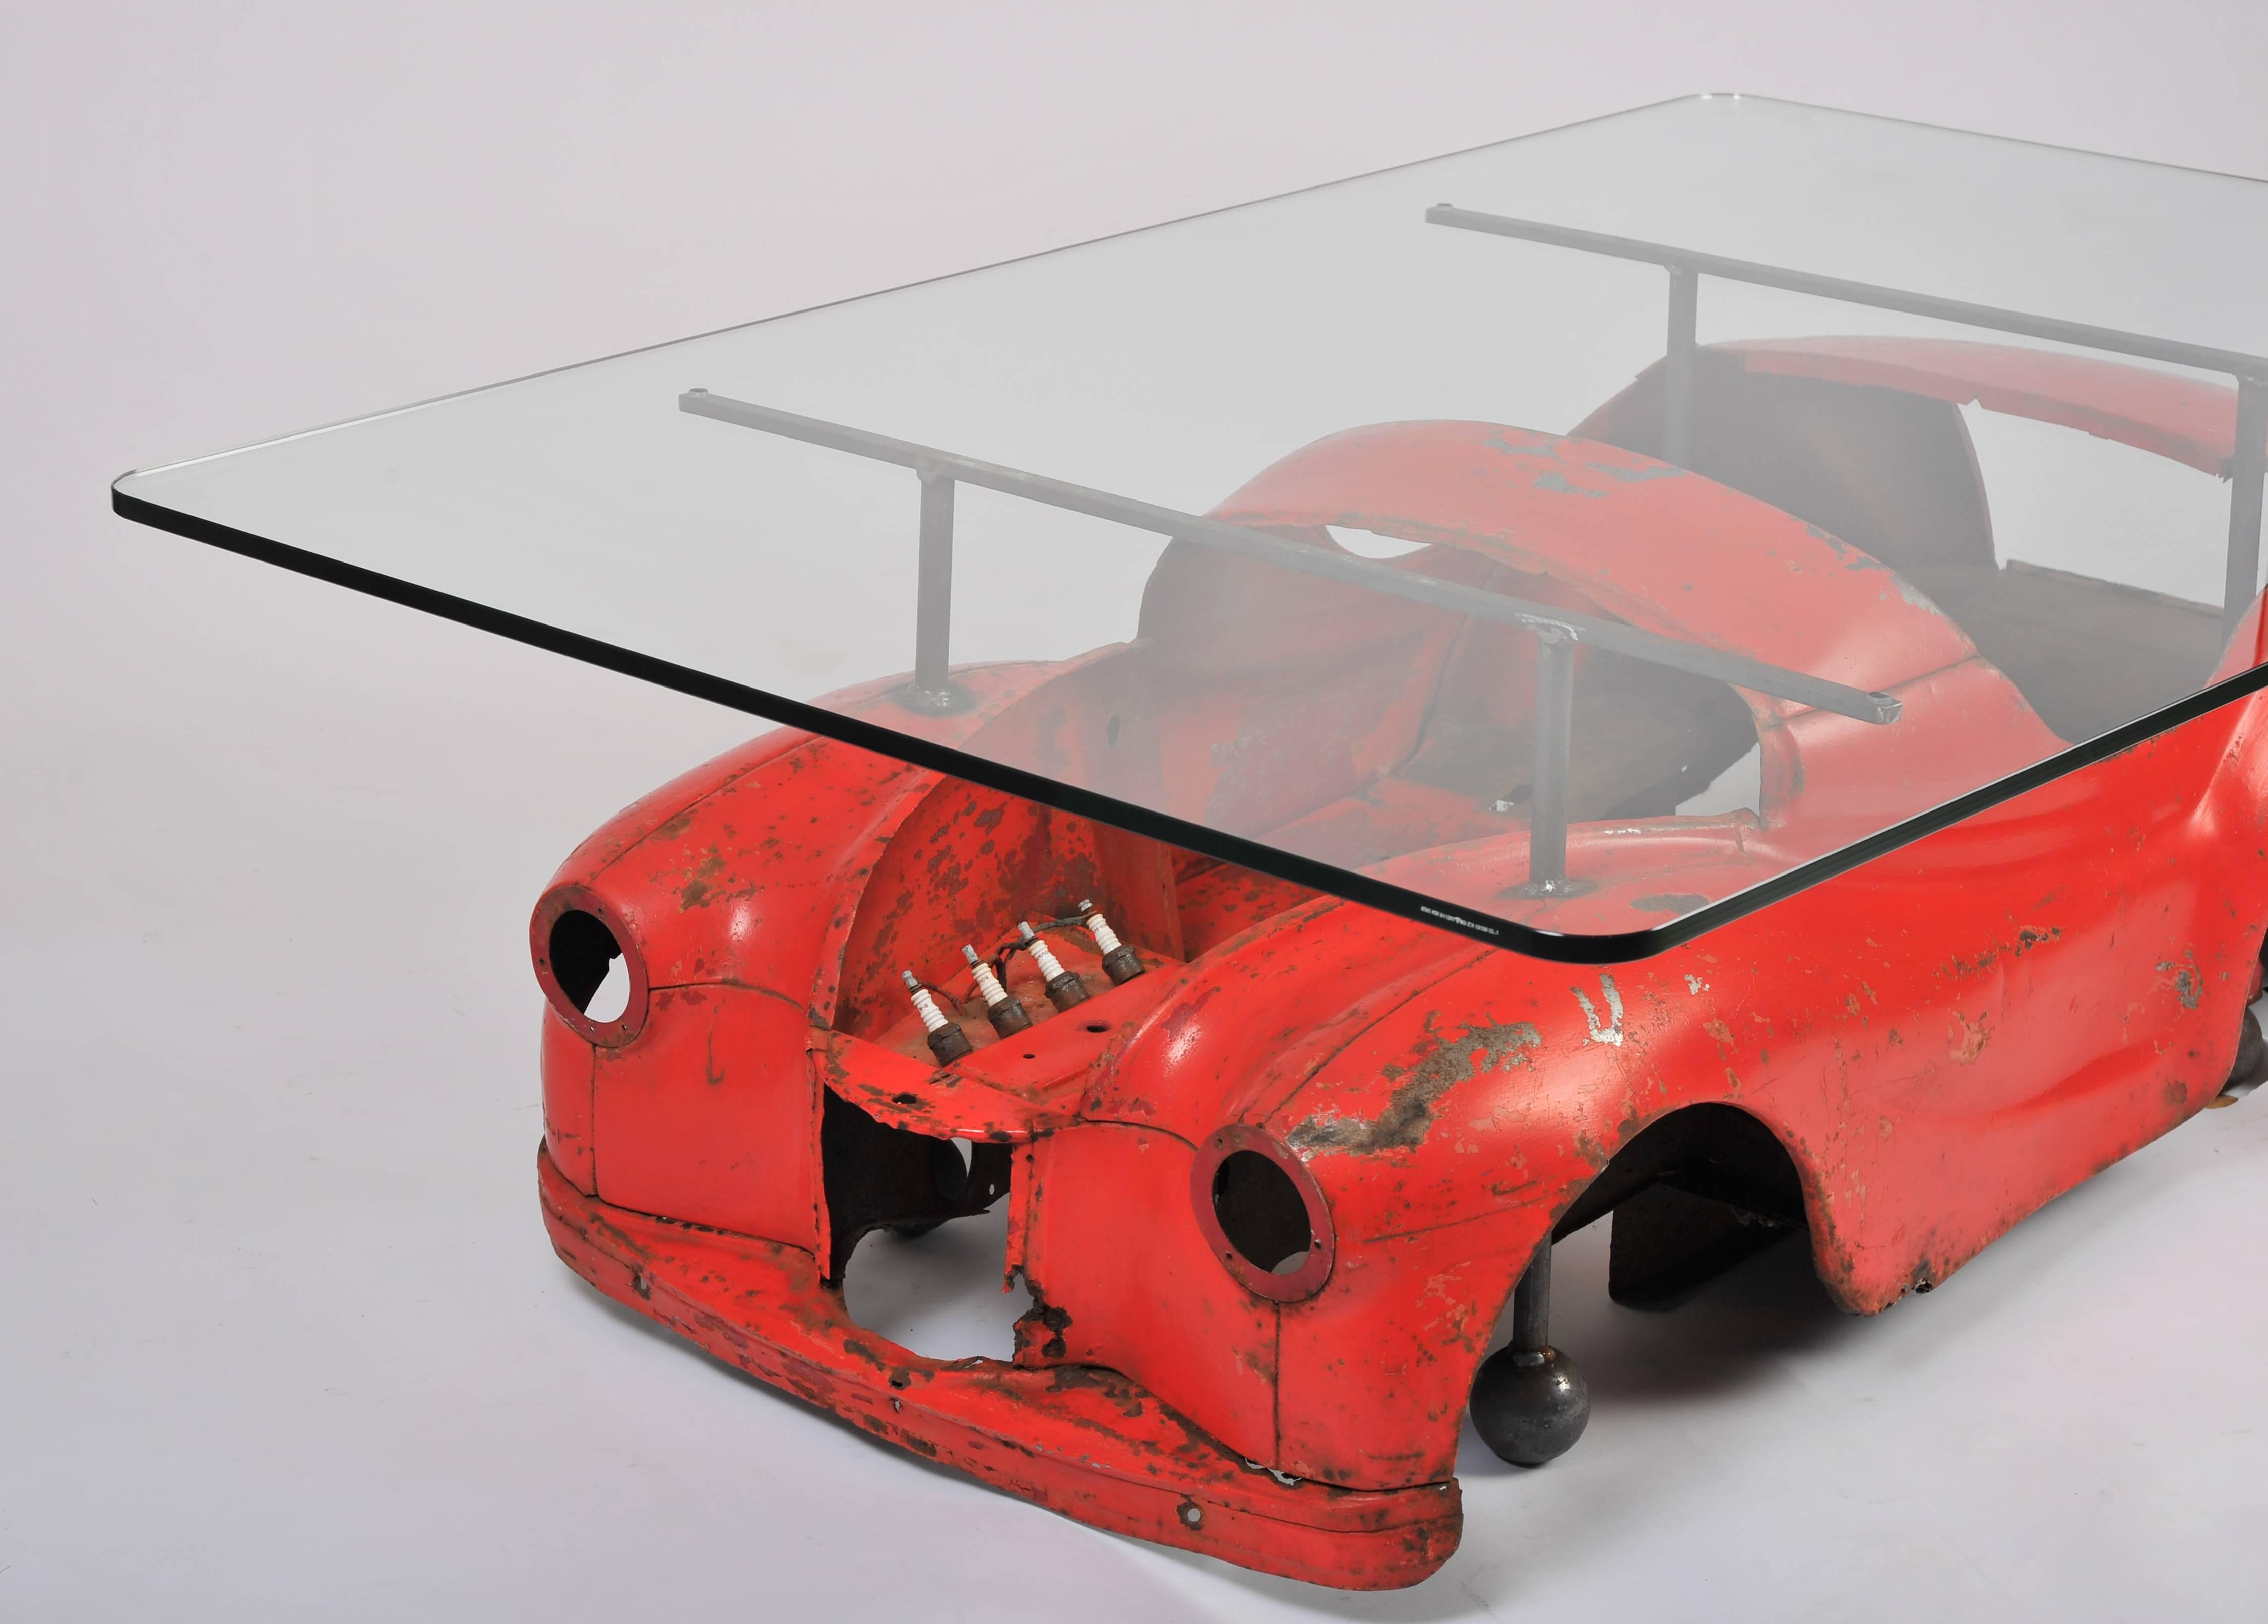 British 20th Century Industrial Coffee Table with Toy Car Design